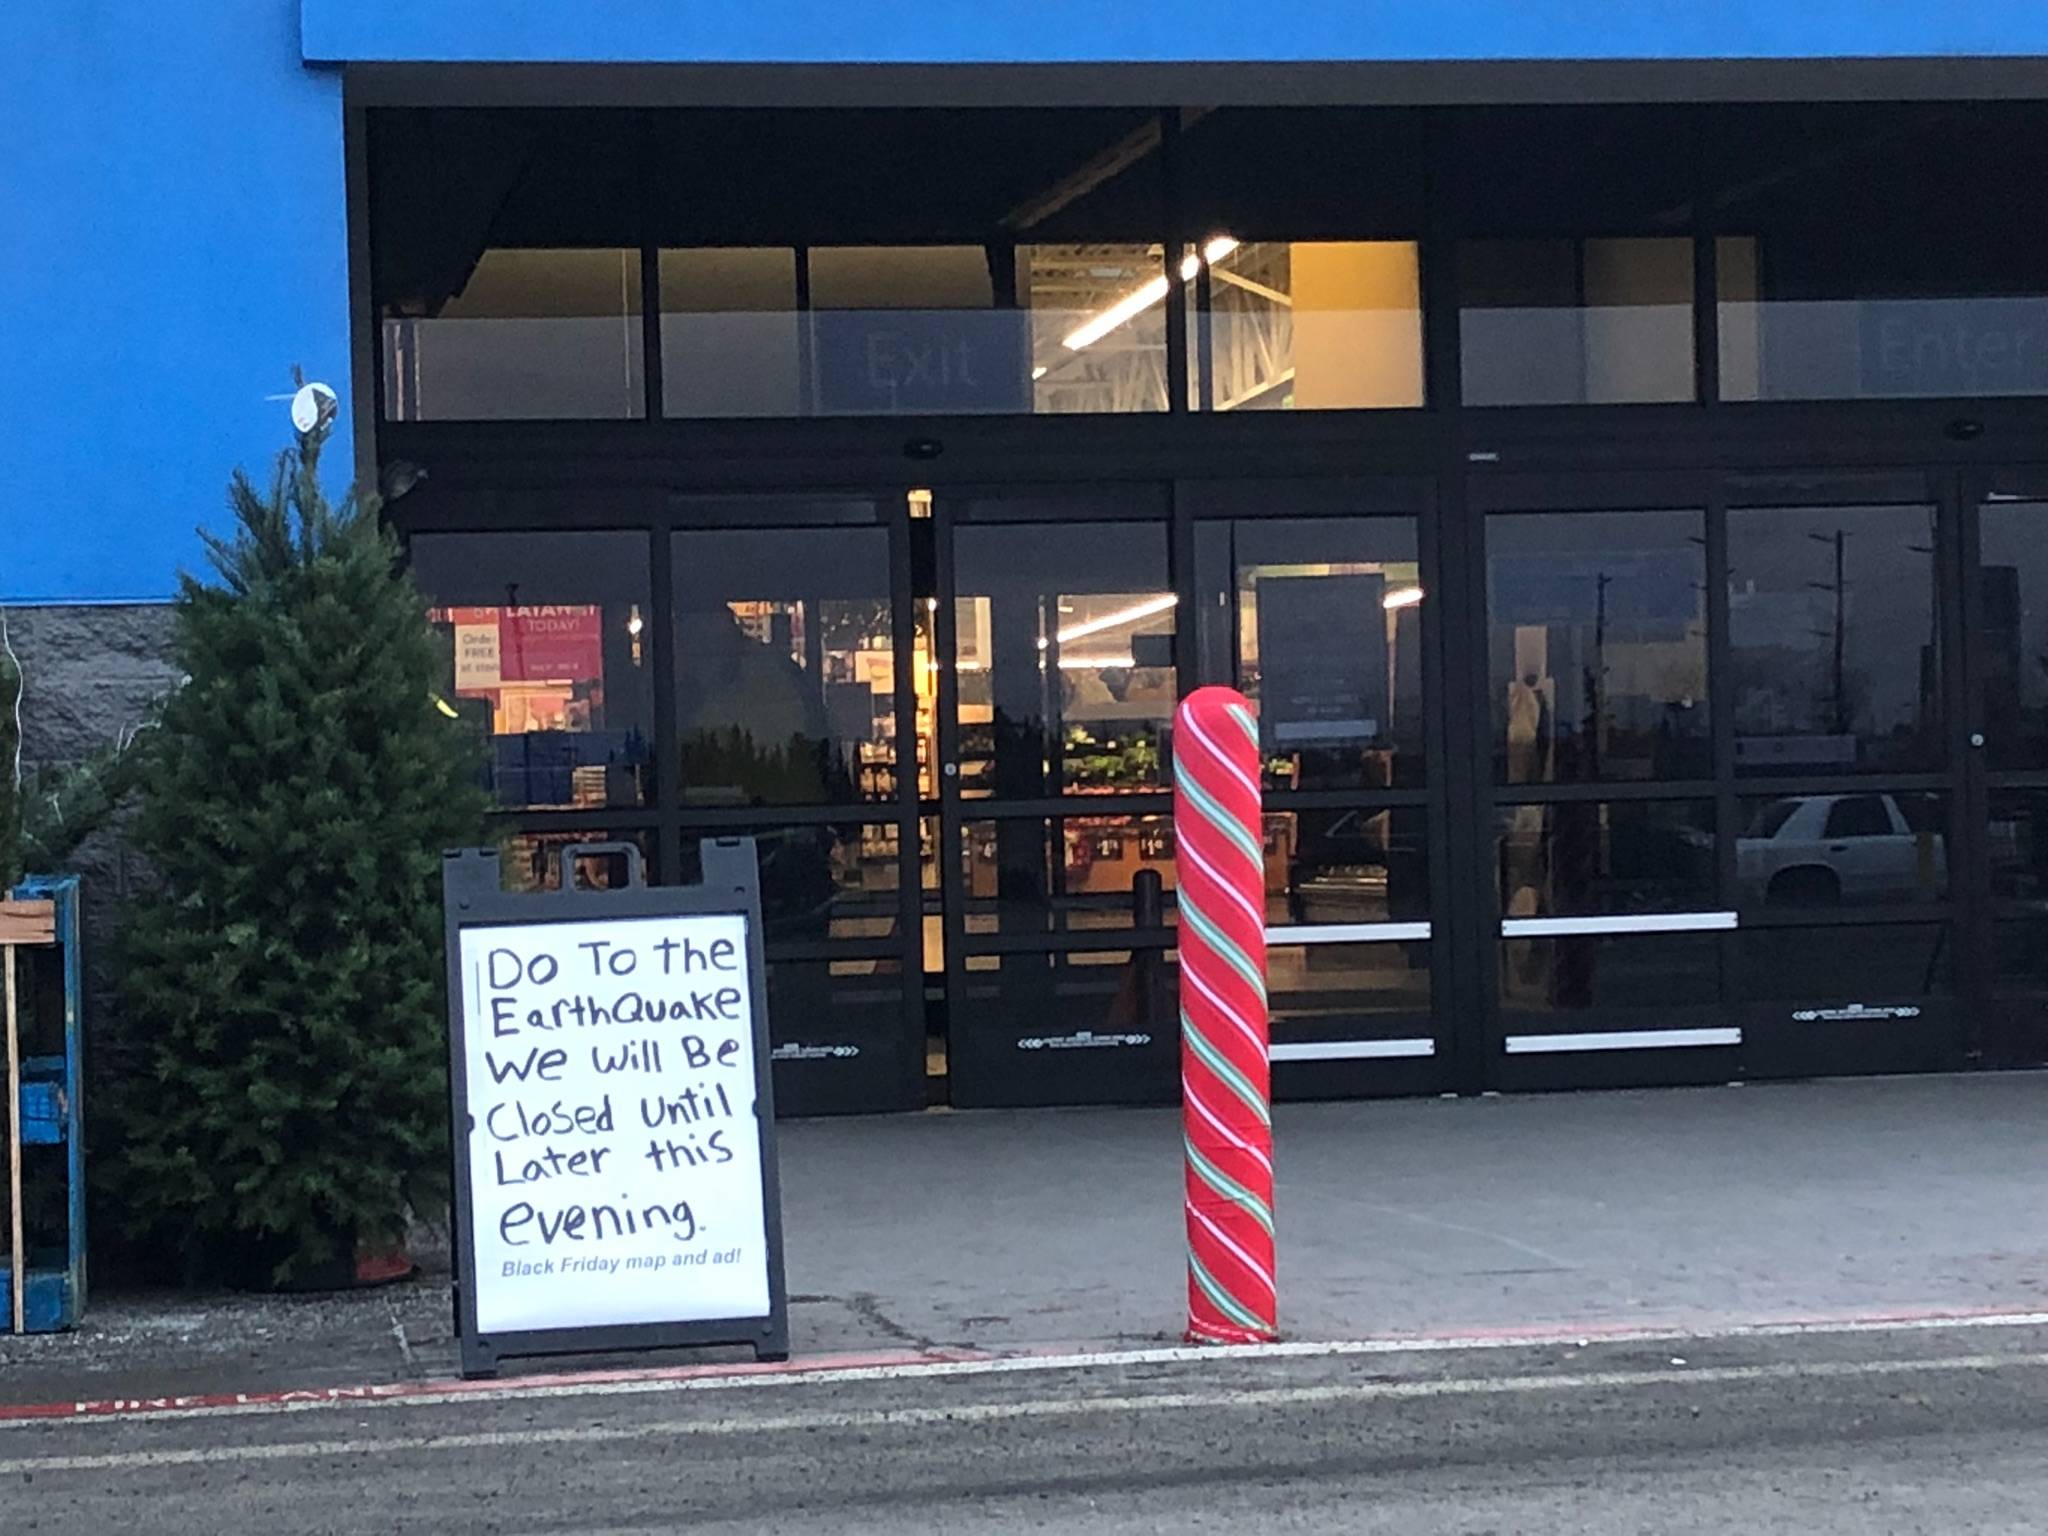 A sign stands outside the Walmart, in Kenai Alaska, on Friday, Nov. 30 informing customers that business is closed due to earthquake damage. (Photo by Victoria Petersen/Peninsula Clarion)